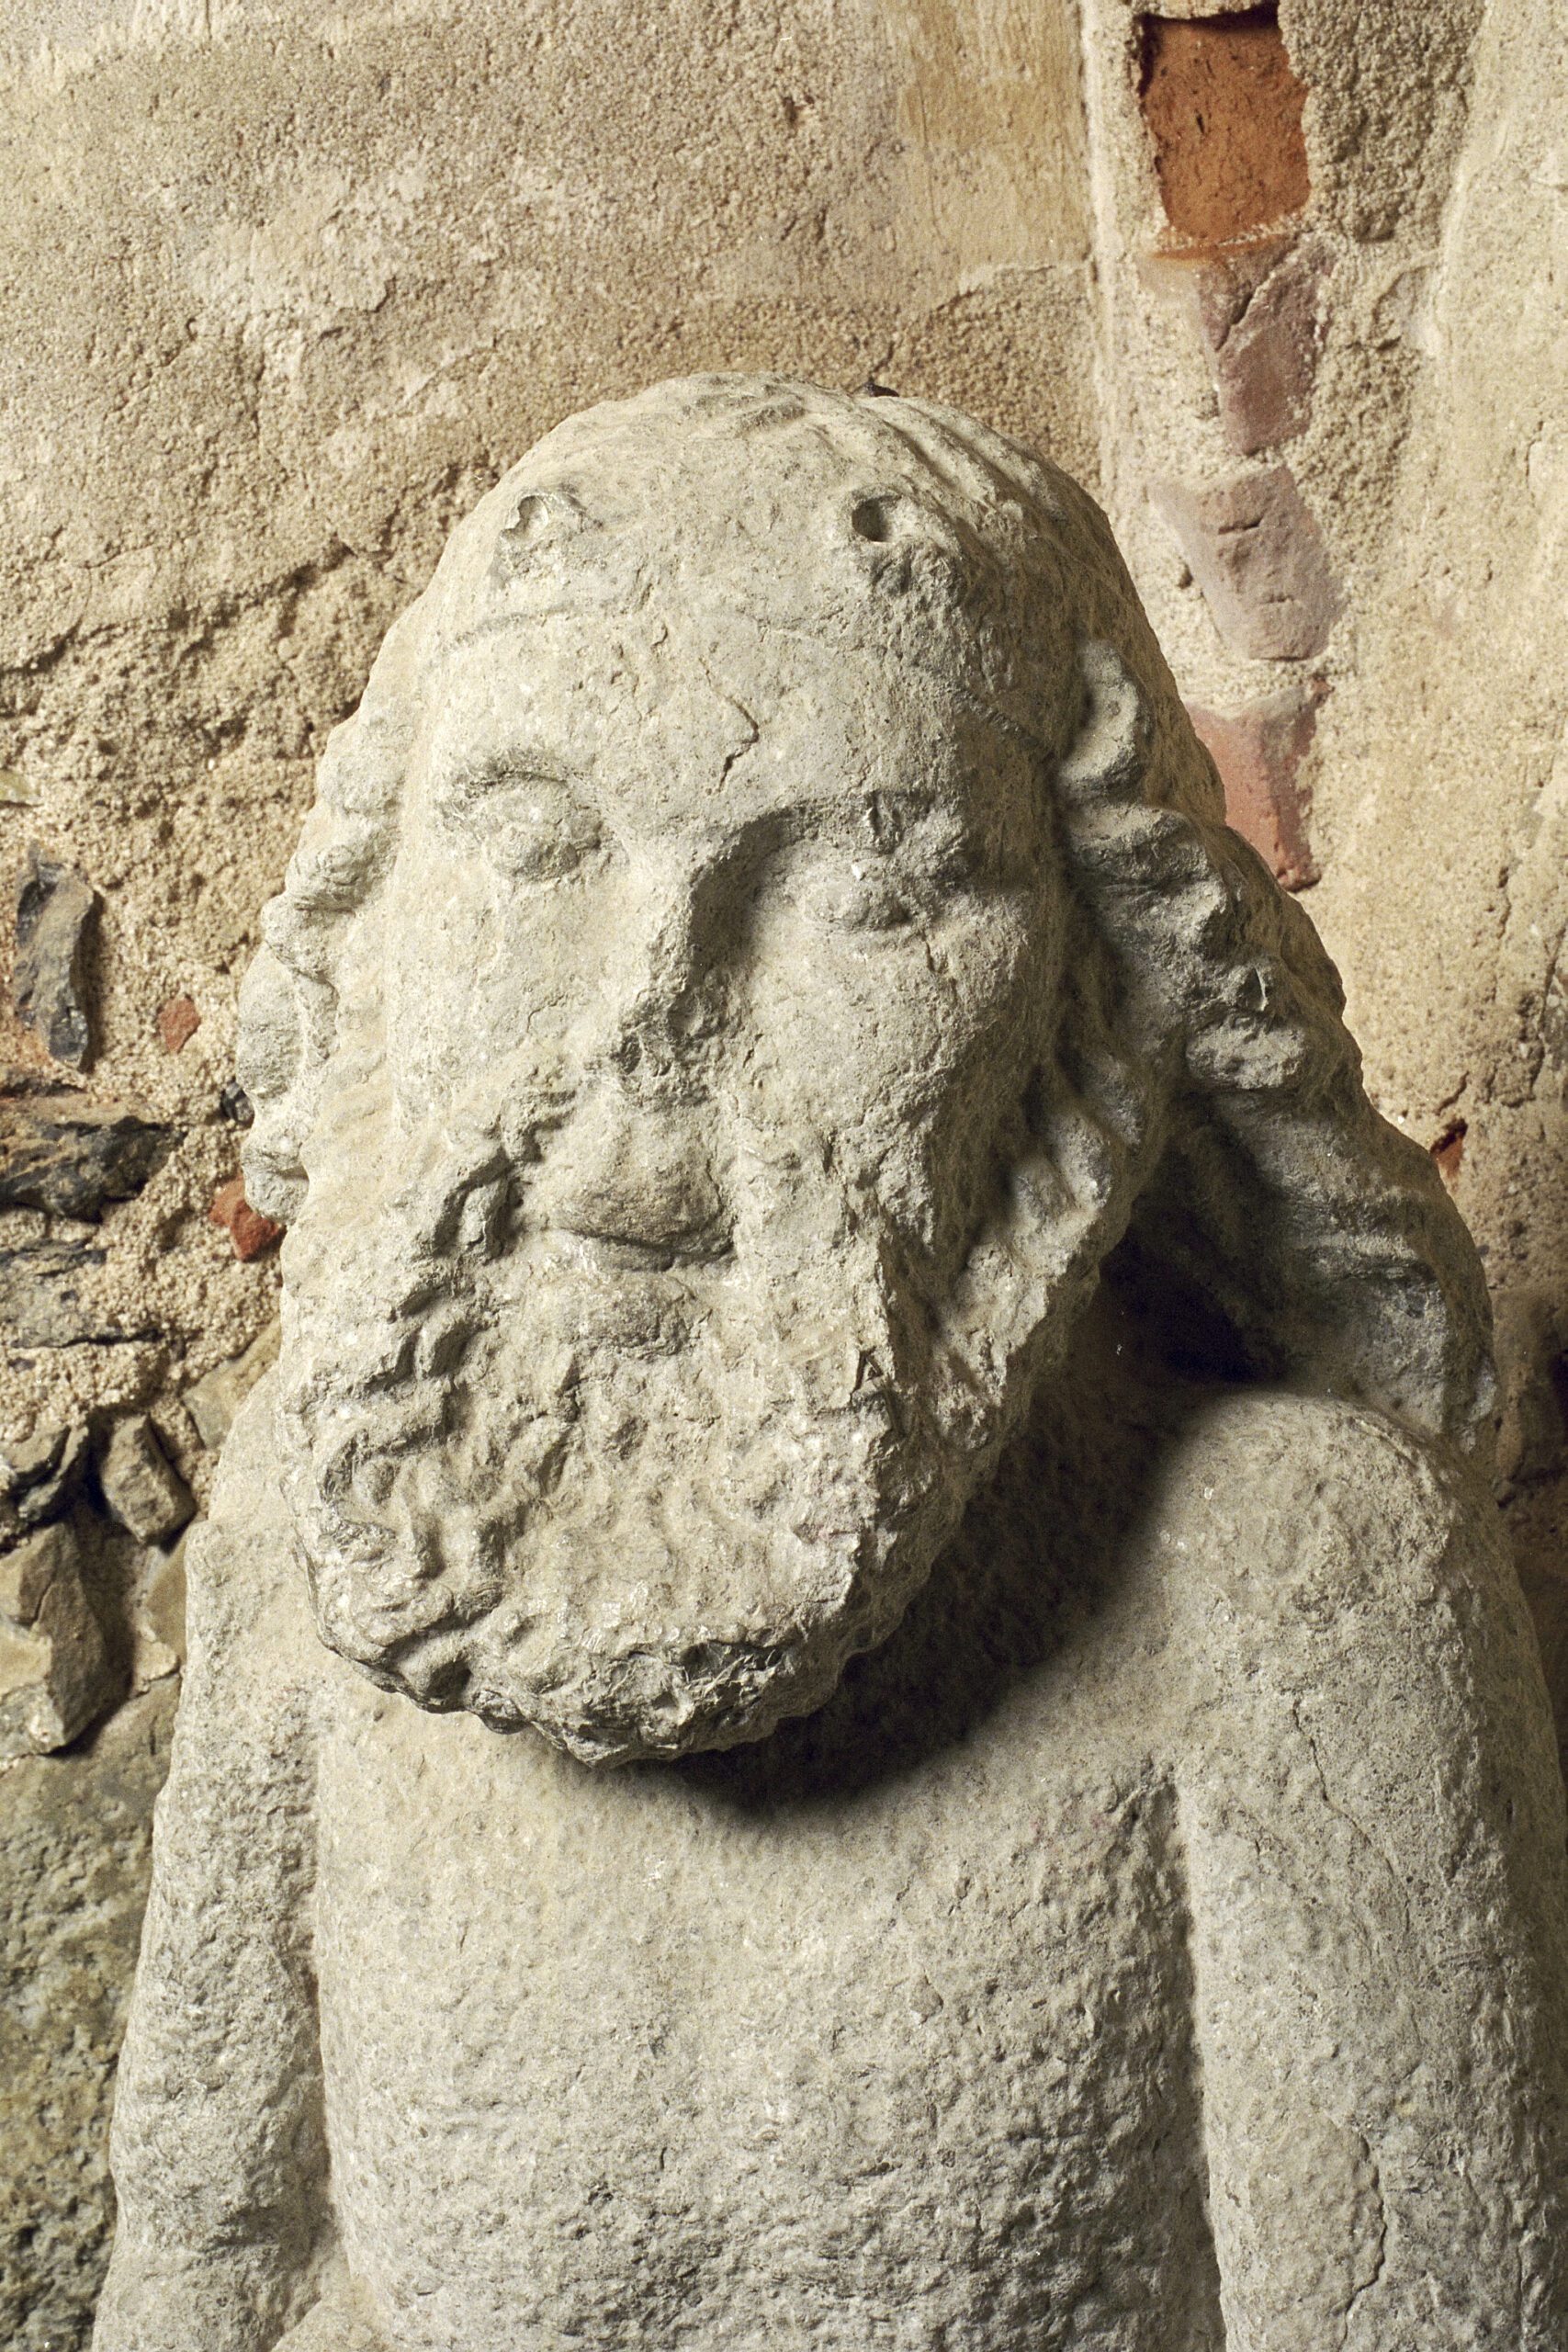 The stone statue of the Wild Man is seen from the chest up. He has shoulder-length beard and hair and a slightly knocked-out nose. Directly behind you can see the castle's wall with lime plaster and brick.